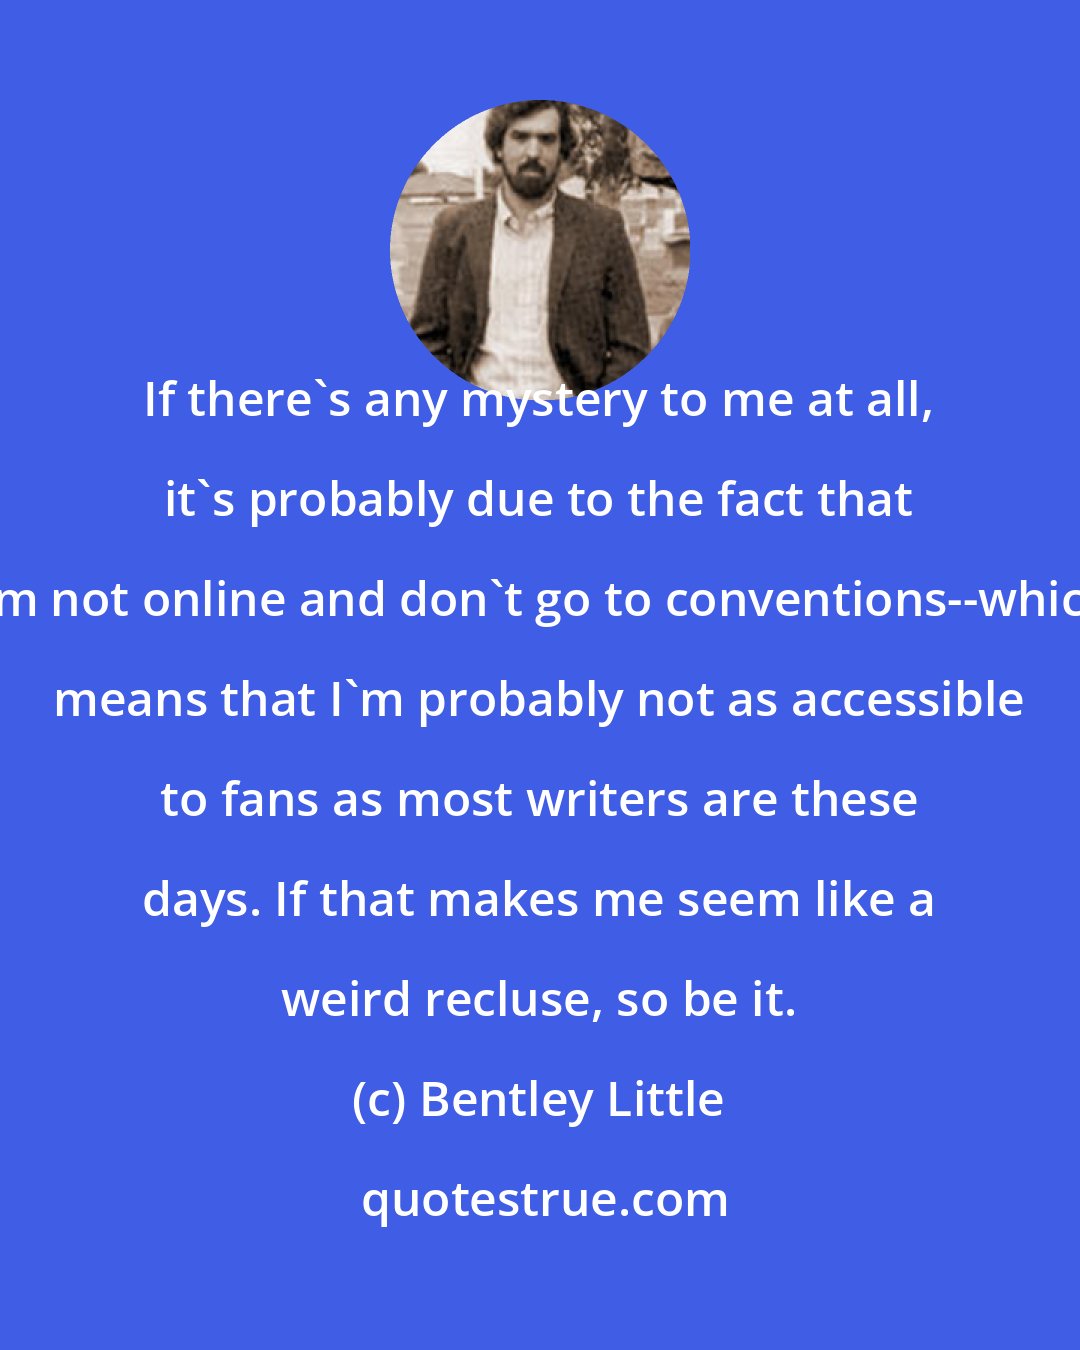 Bentley Little: If there's any mystery to me at all, it's probably due to the fact that I'm not online and don't go to conventions--which means that I'm probably not as accessible to fans as most writers are these days. If that makes me seem like a weird recluse, so be it.